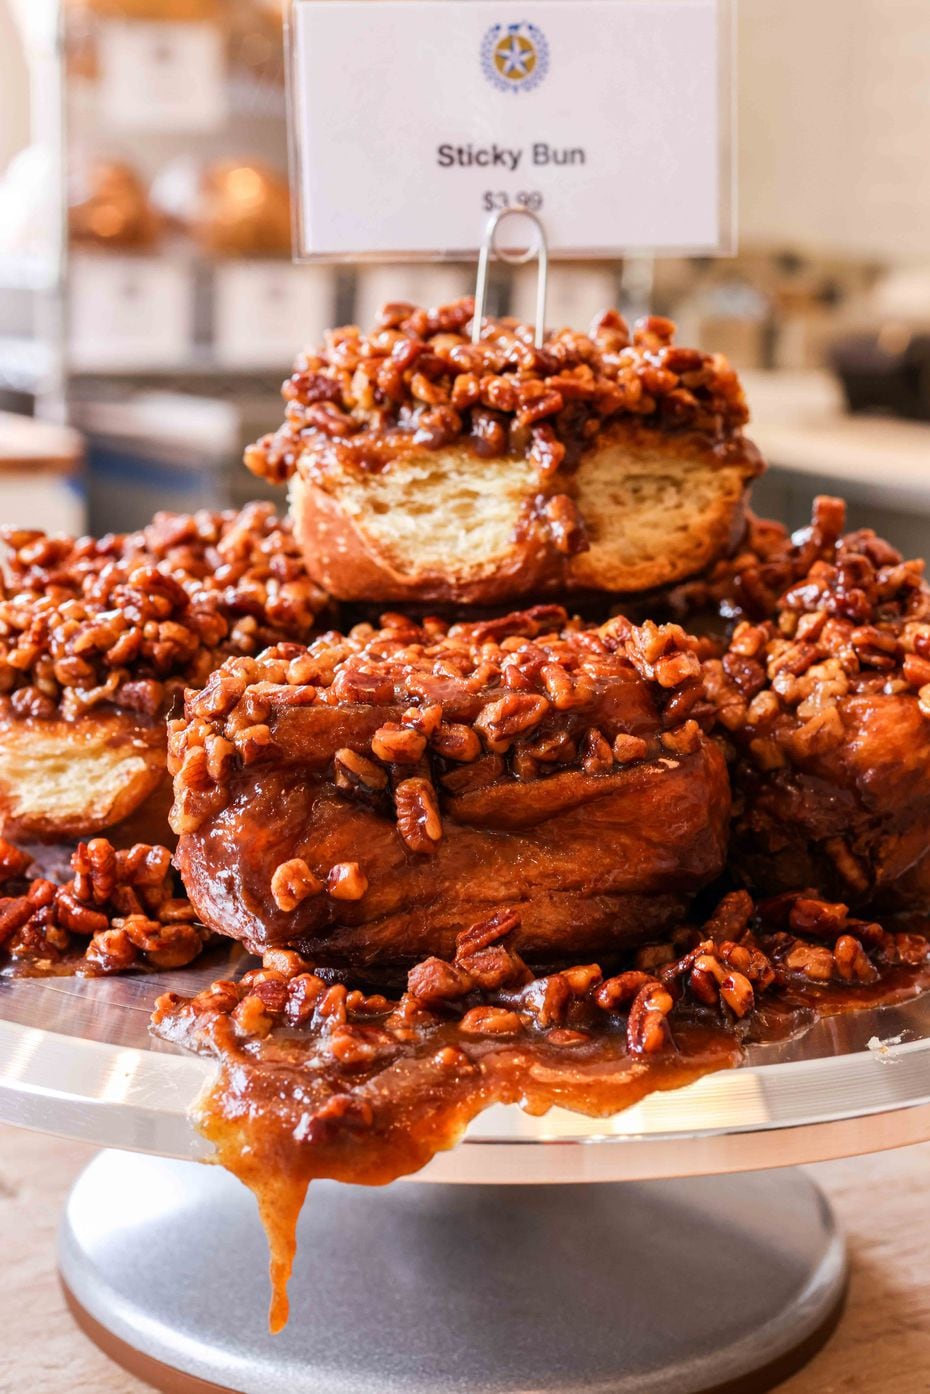 Sticky buns are one of several sweet treats at Empire Baking Company in East Dallas.